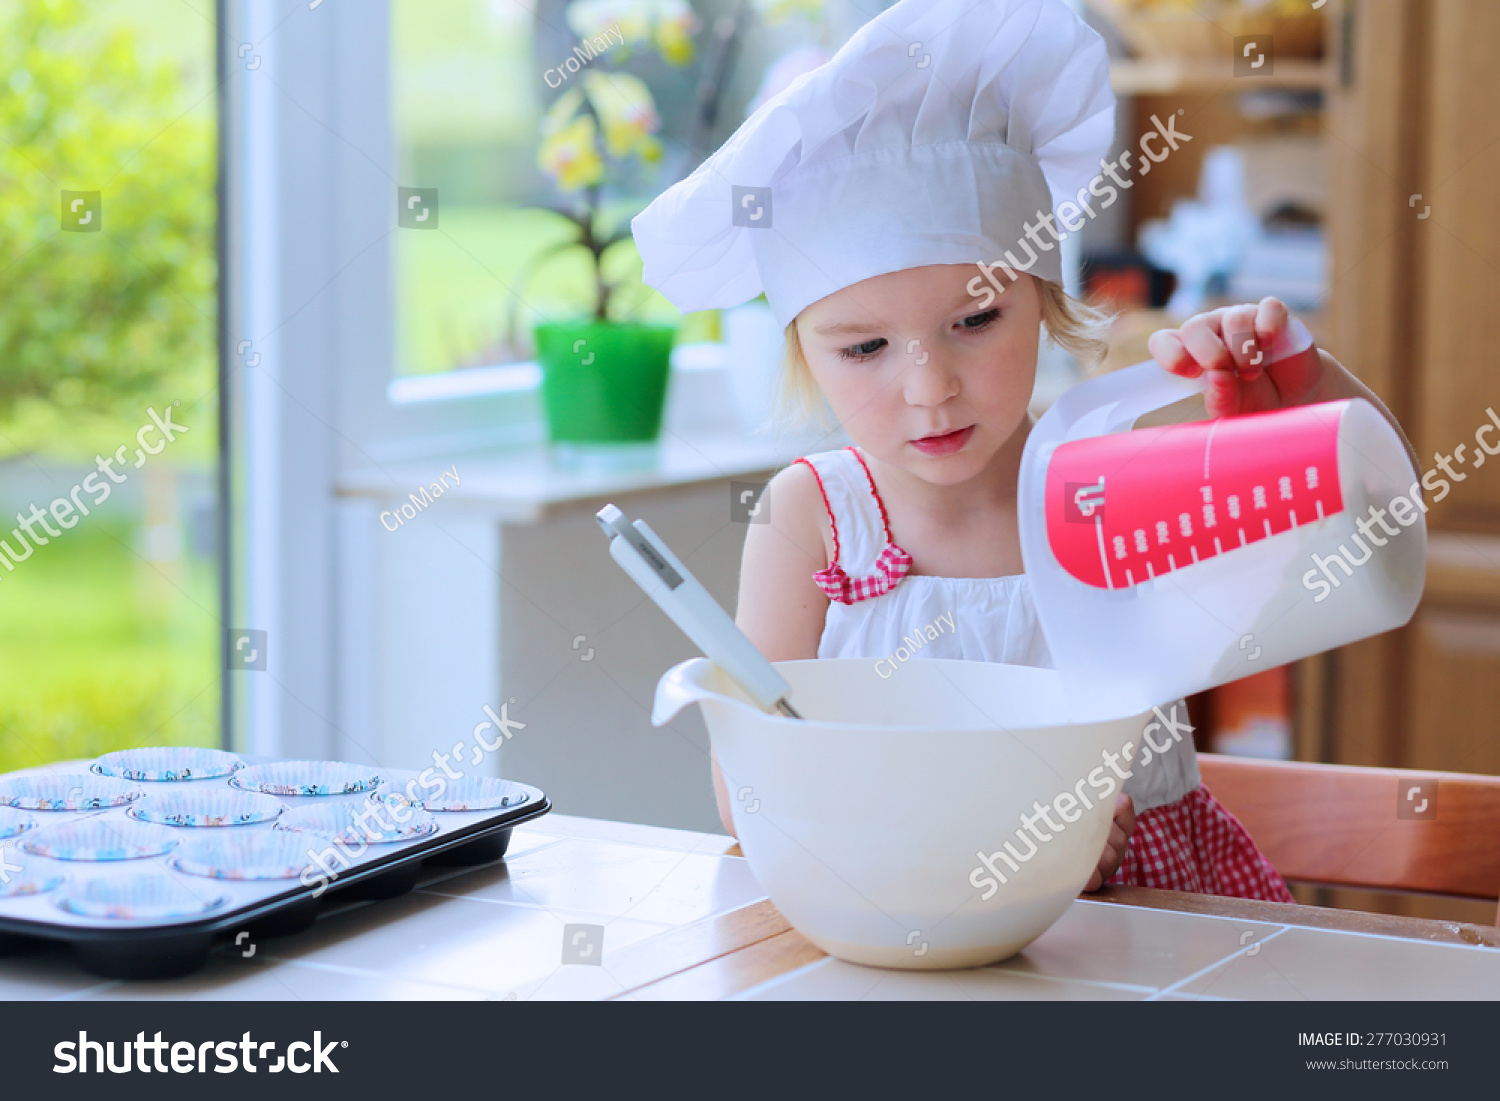 Baking With Children. Little Happy Kid, Adorable Toddler Girl In White ...